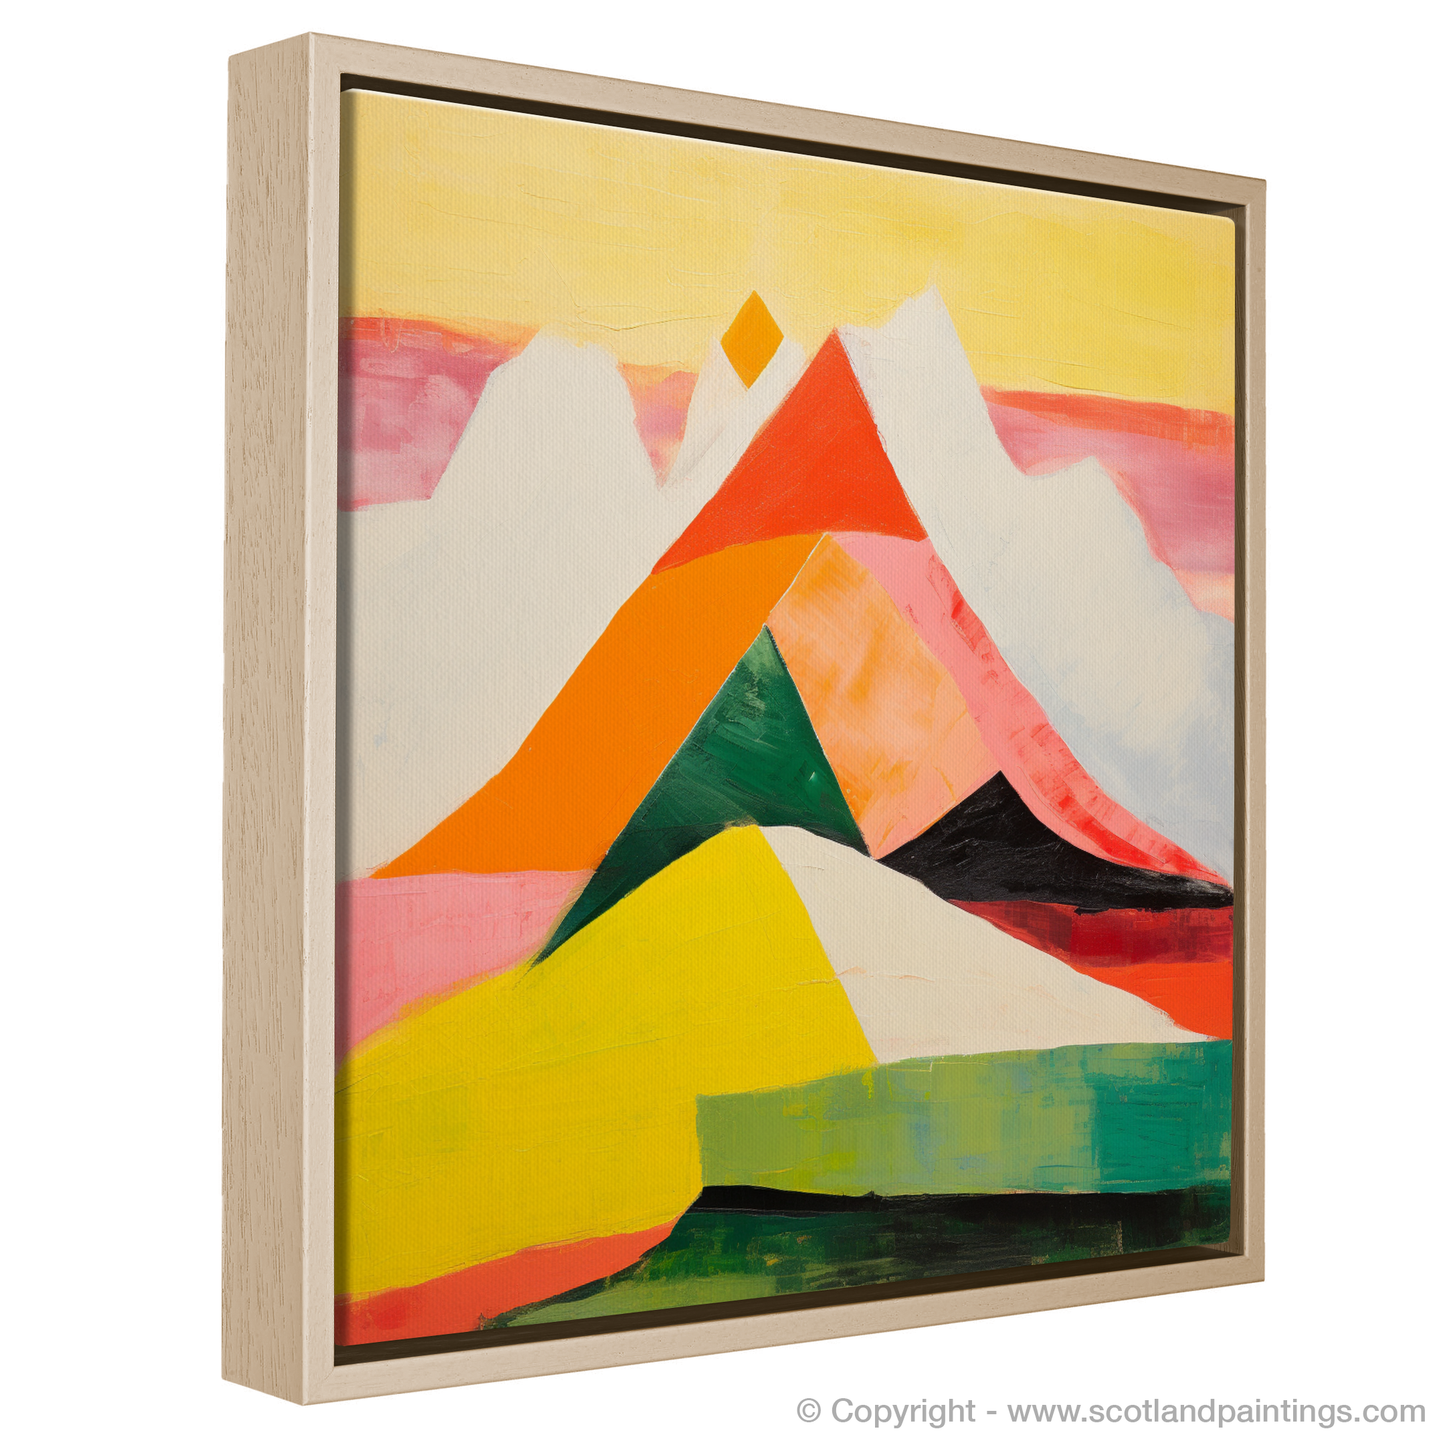 Painting and Art Print of Mount Keen entitled "Abstract Symphony of Mount Keen".